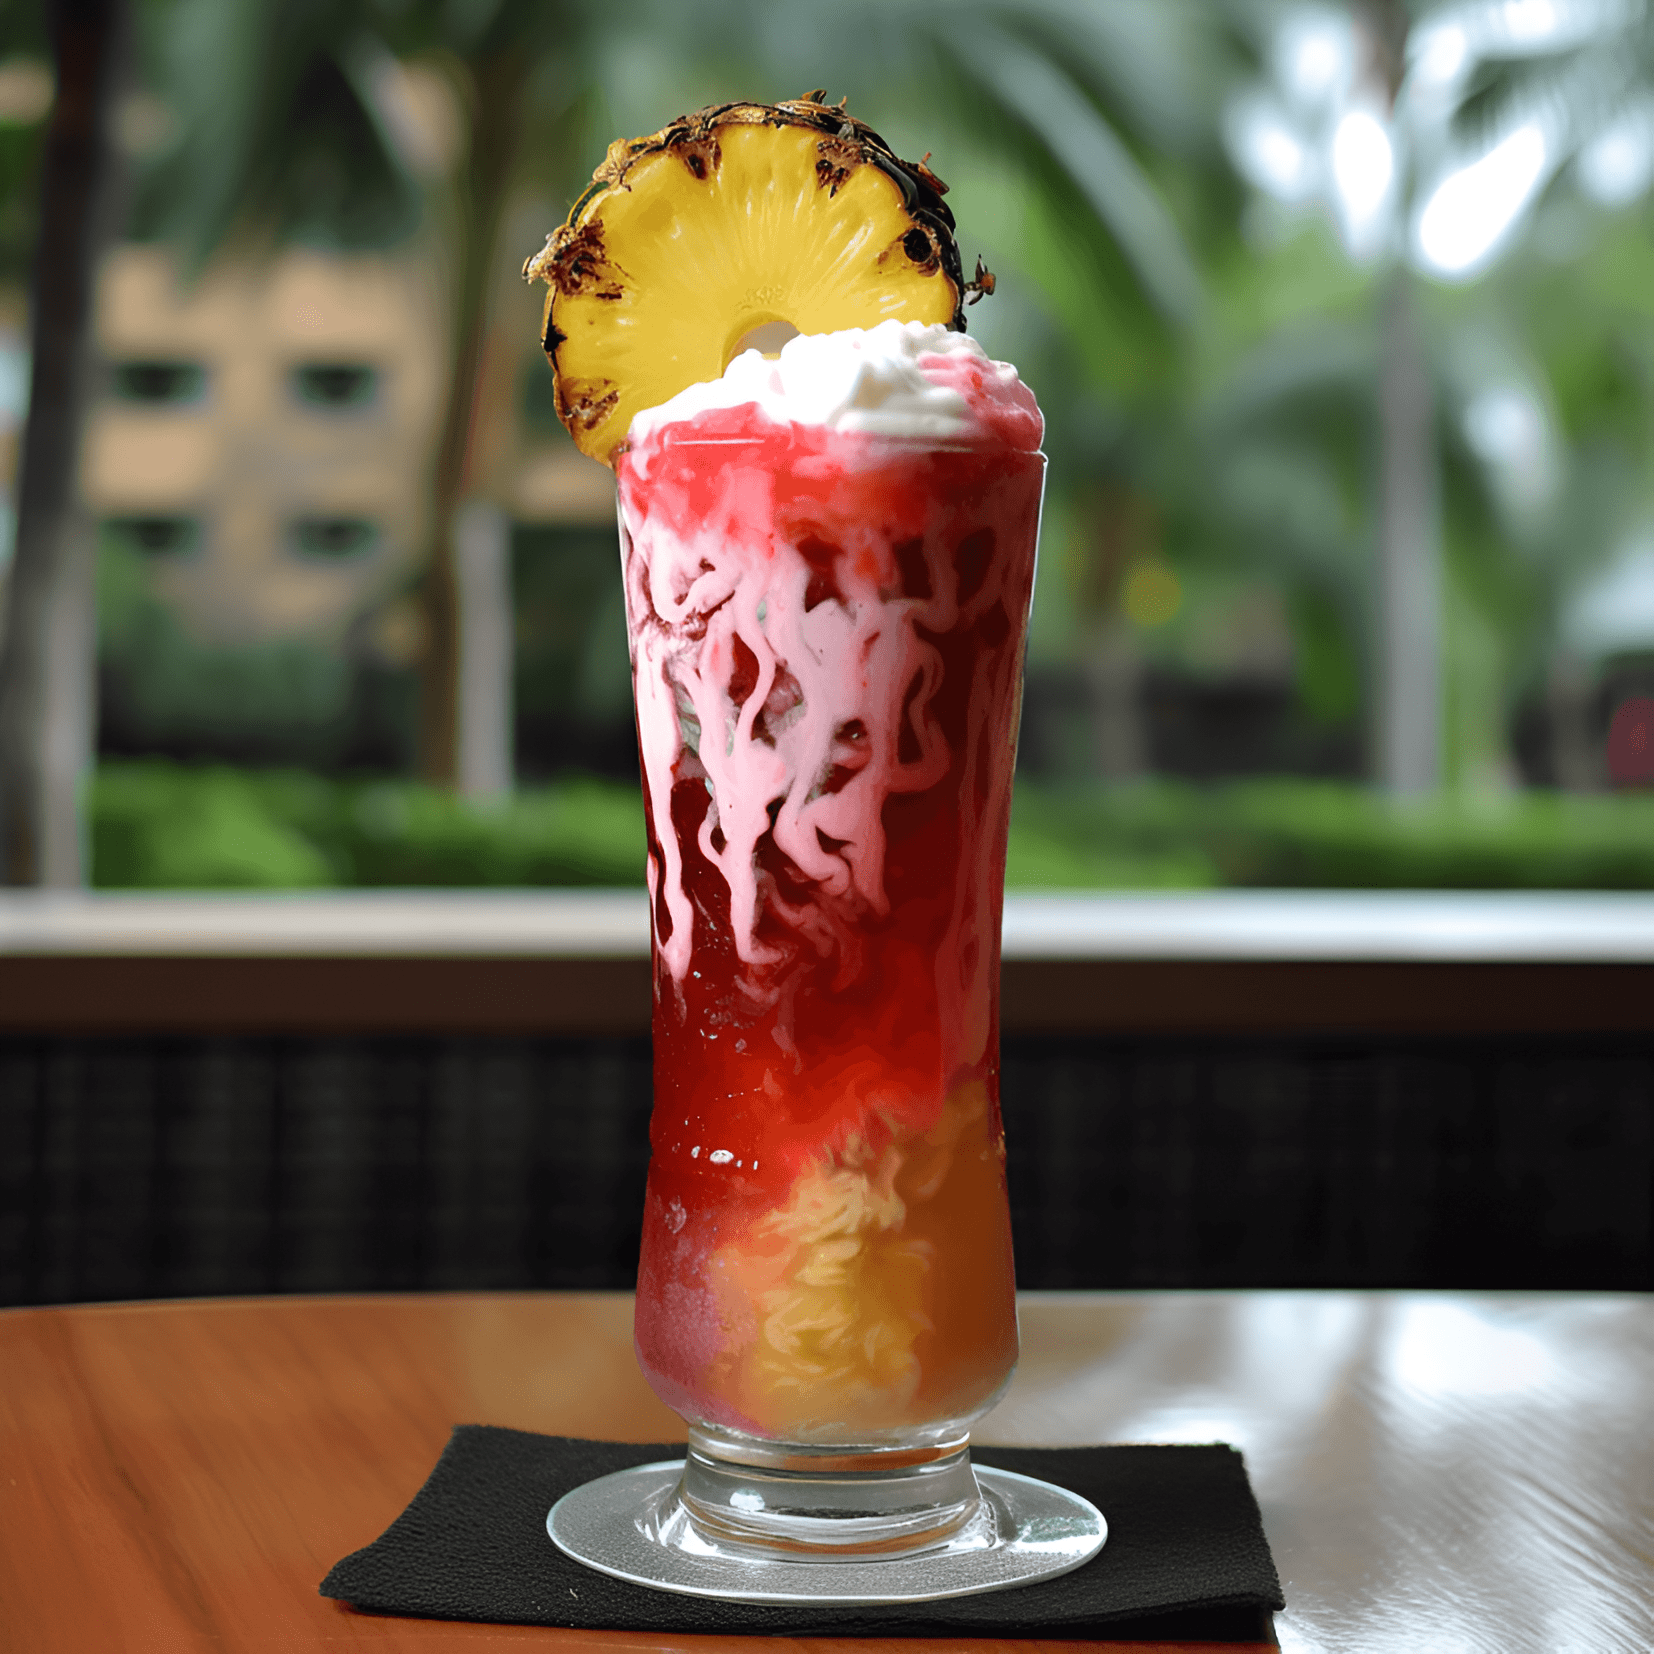 Lava Flow Cocktail Recipe - The Lava Flow cocktail is a delicious combination of sweet, fruity, and creamy flavors. The drink is rich and velvety, with a hint of tanginess from the pineapple and a subtle coconut undertone. The strawberry puree adds a touch of tartness and a beautiful contrast in both taste and appearance.